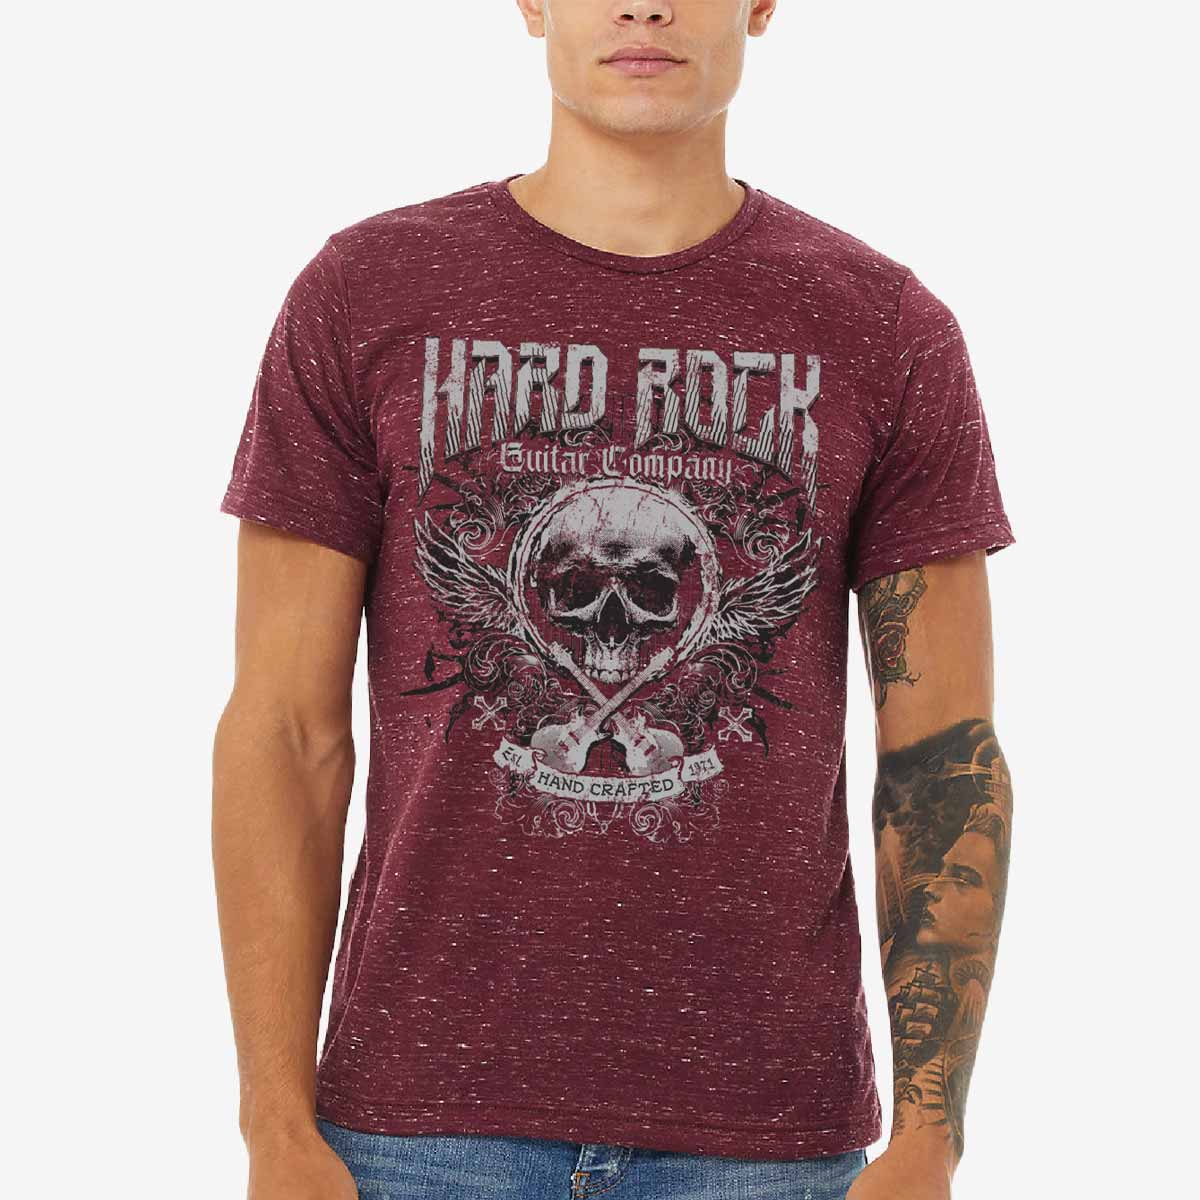 Guitar Company Relaxed Fit Skull Tee in Marbled Maroon image number 1